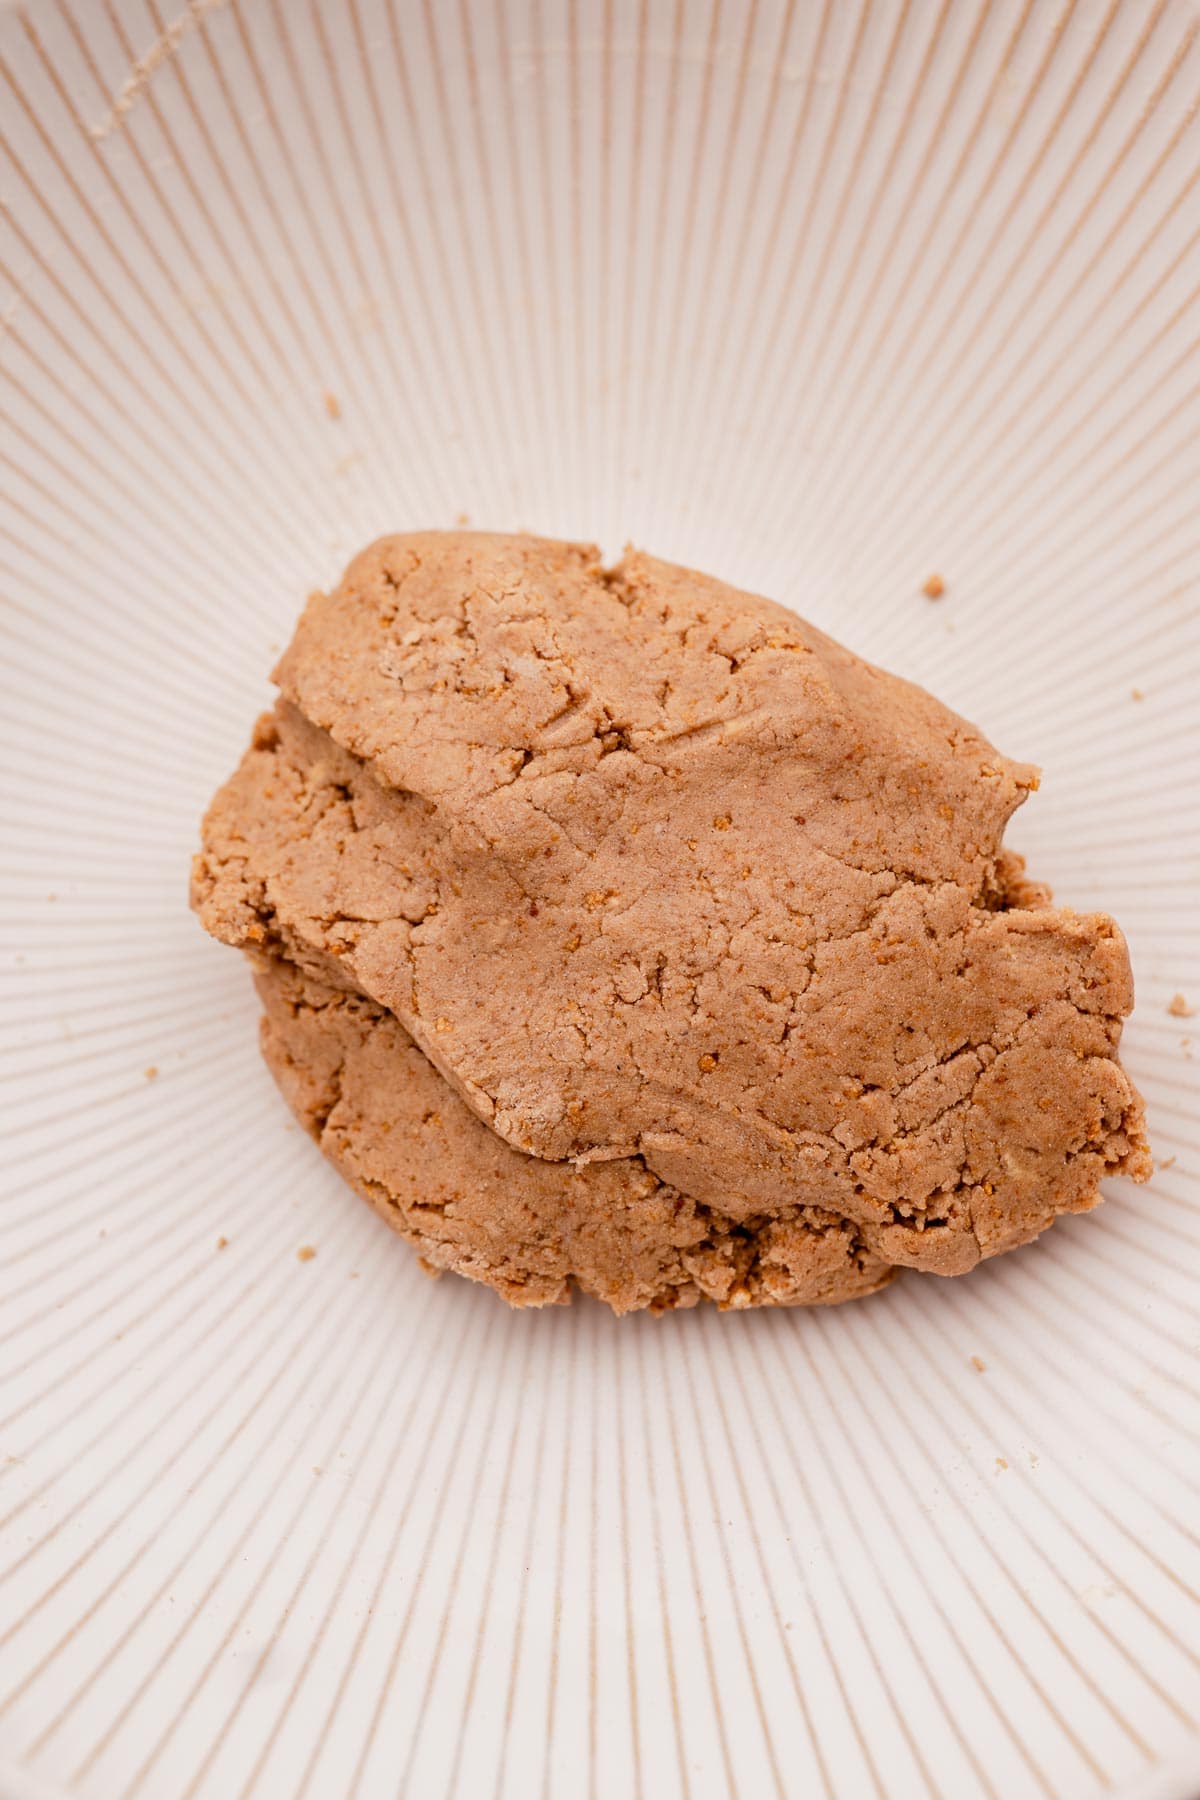 A piece of ginger cookie on a plate.